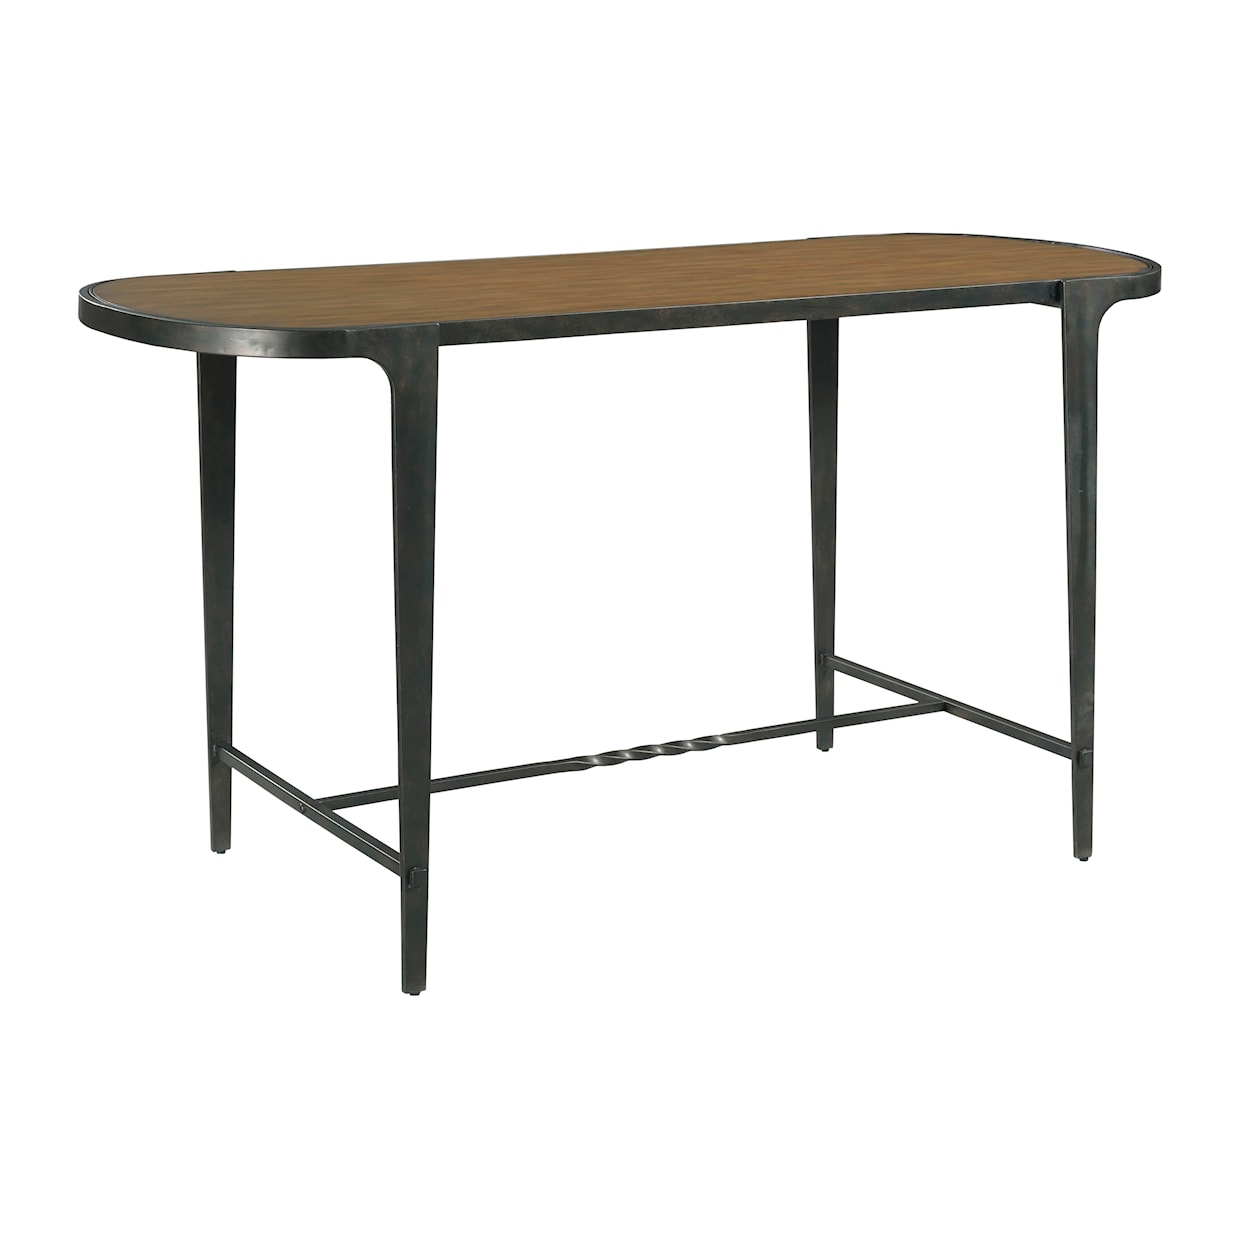 Hammary Olmsted Oval Counter Table